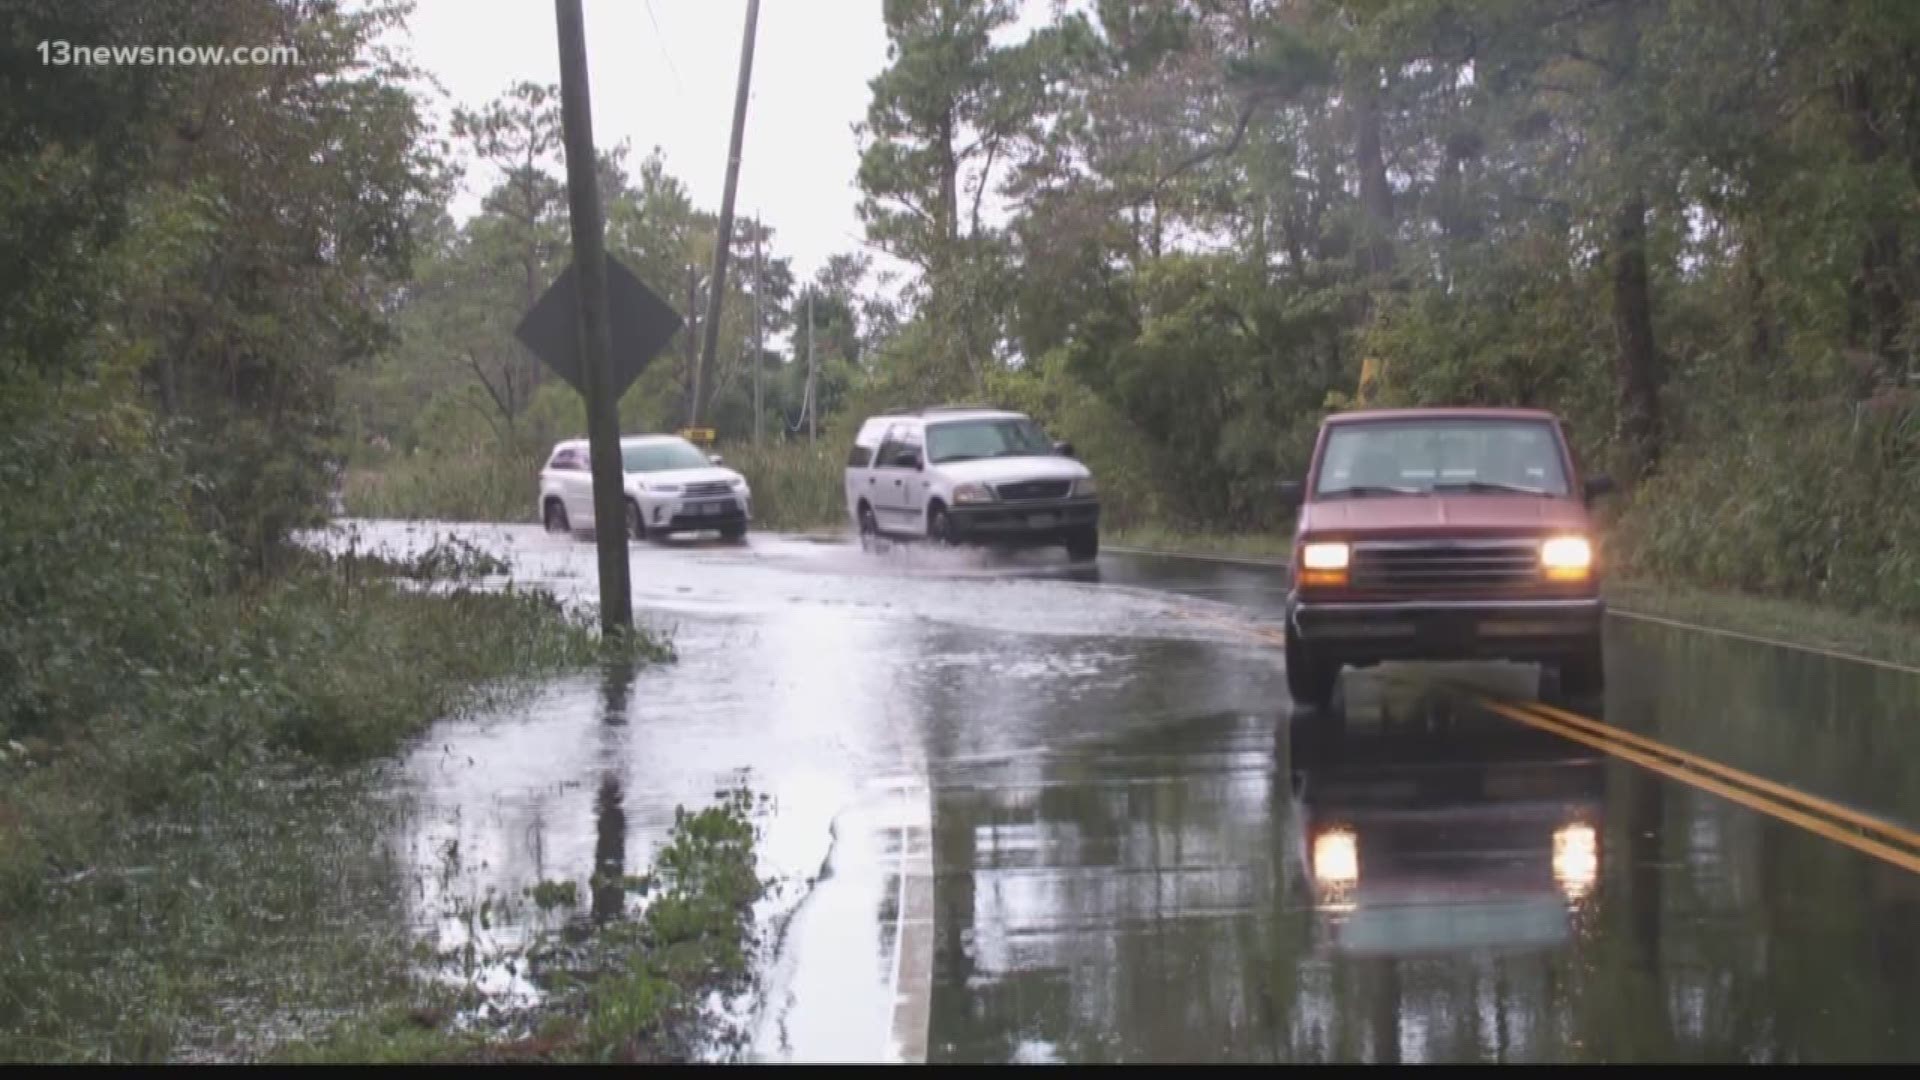 Another strong southwest wind is flooding another road in Pungo.